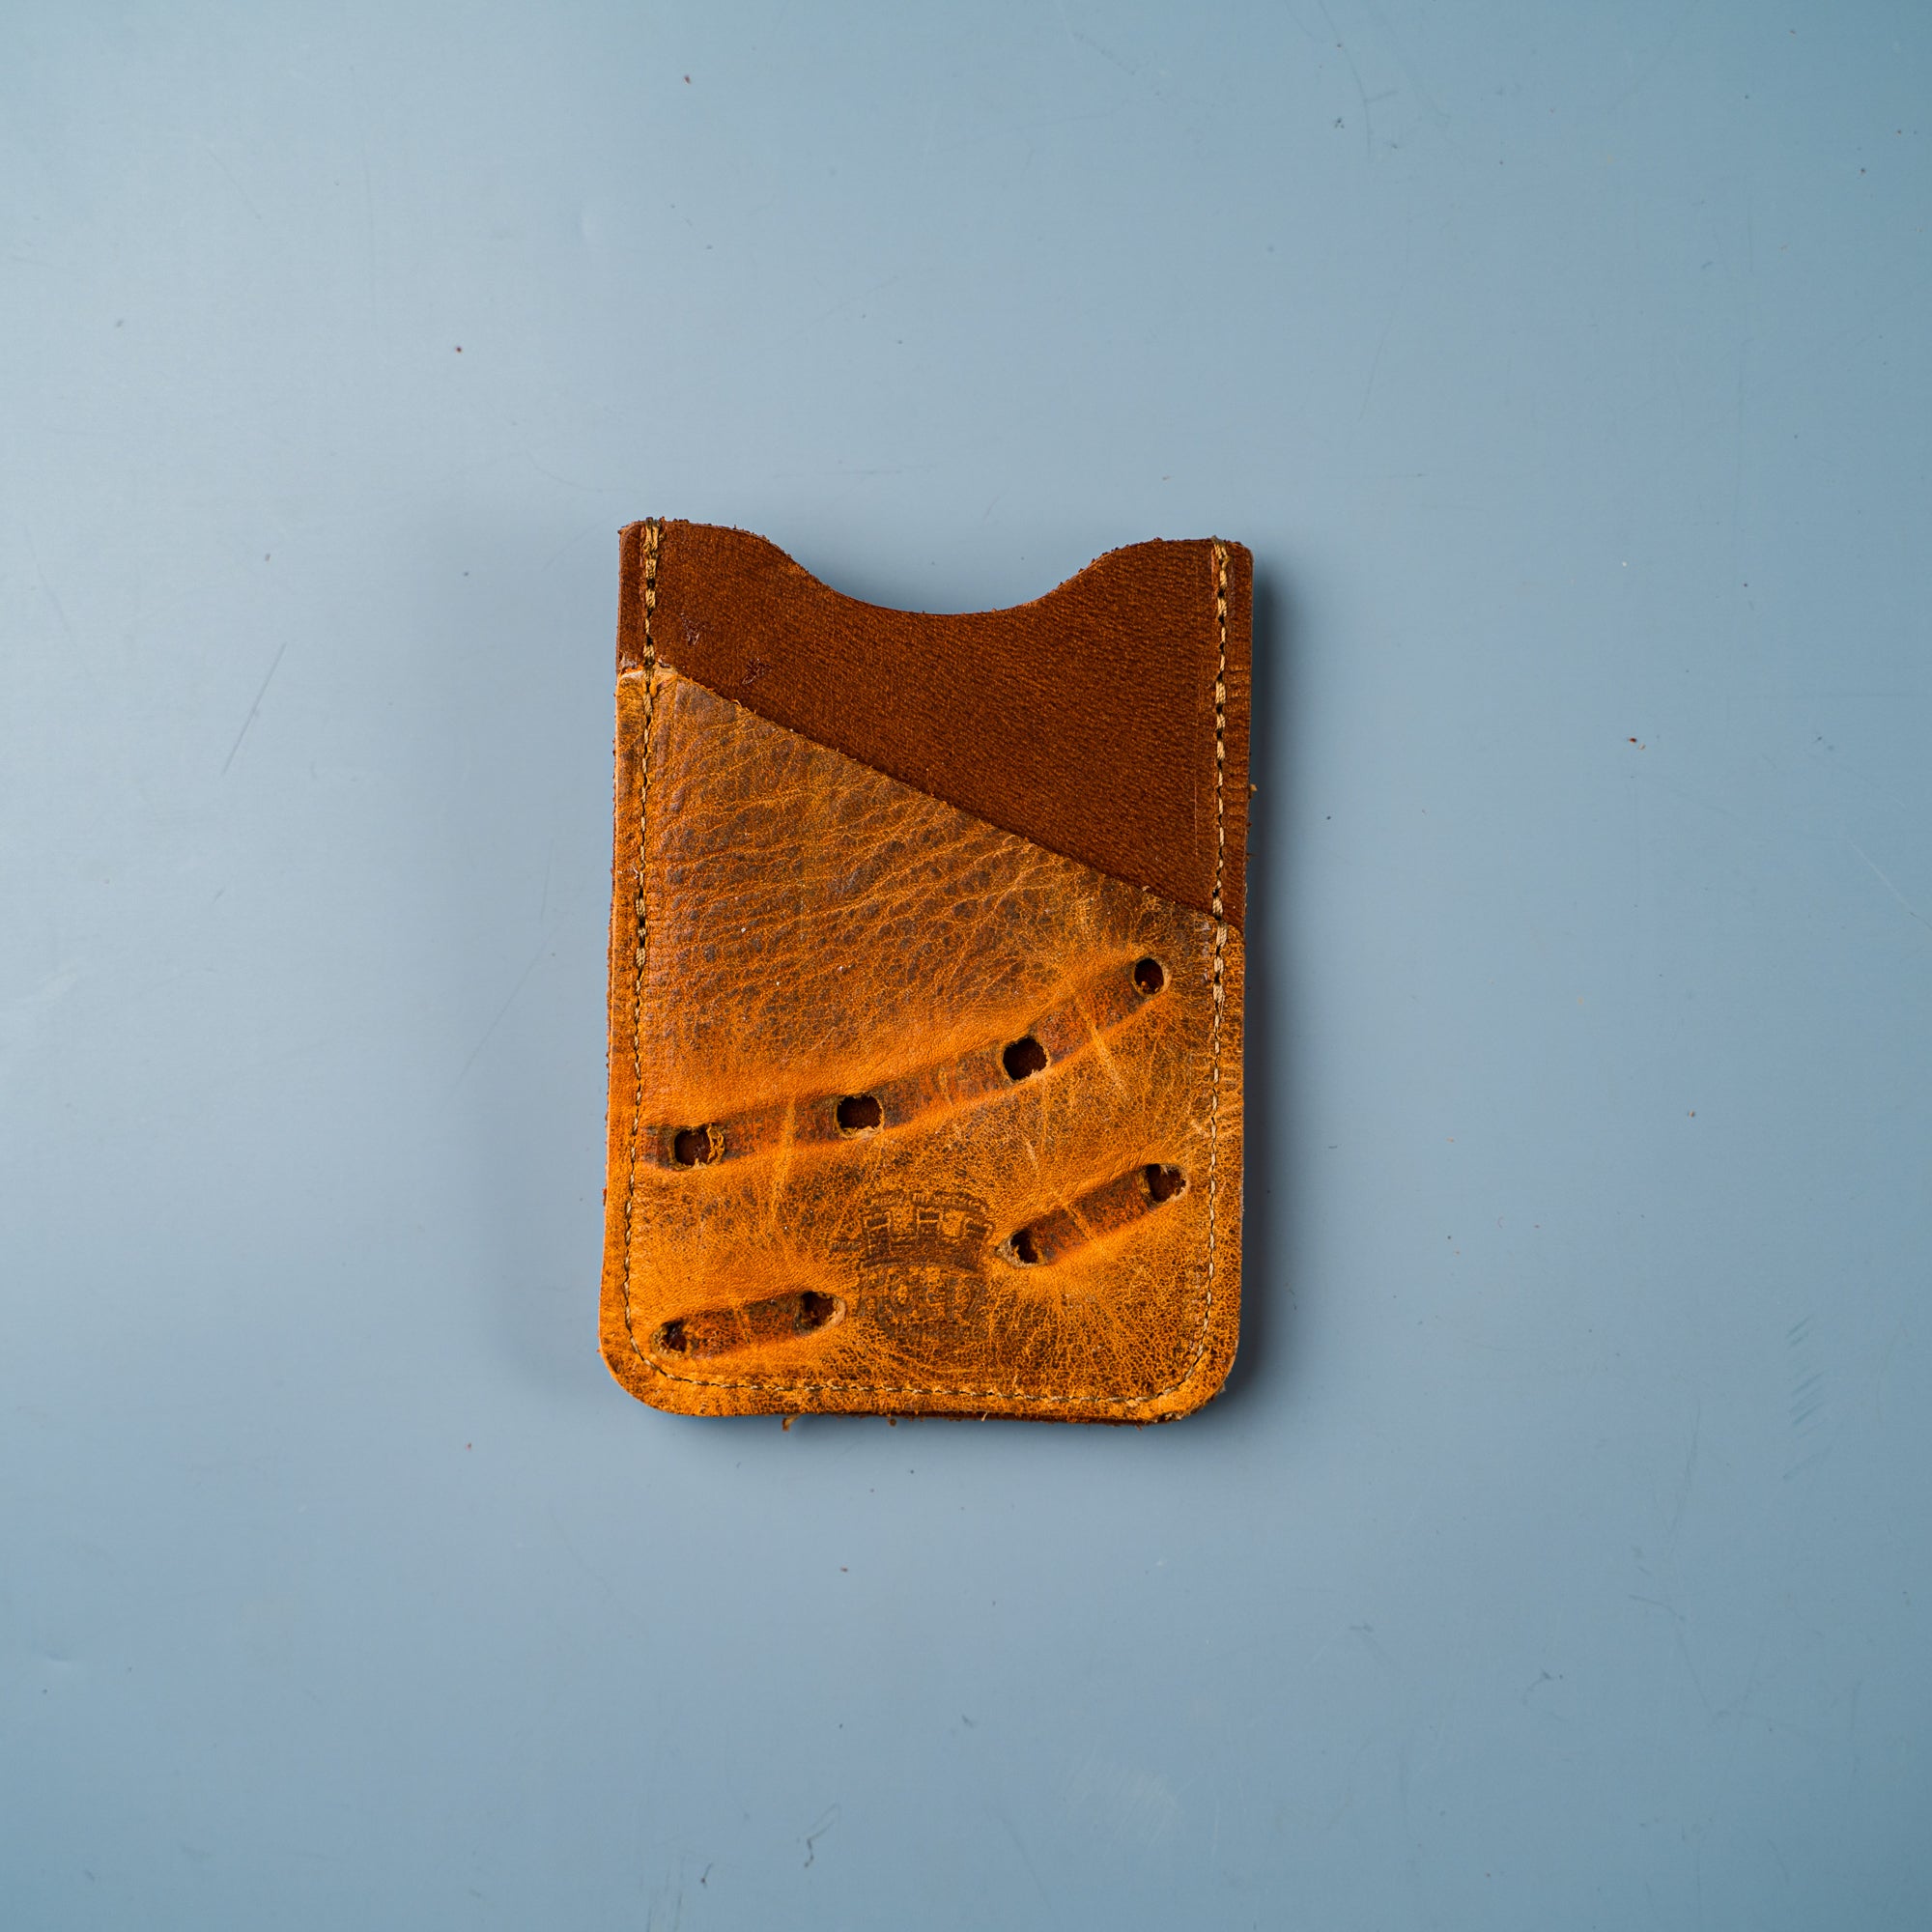 Baseball Glove Leather Money Clip - FC Goods - The Classics Money Clip Yes